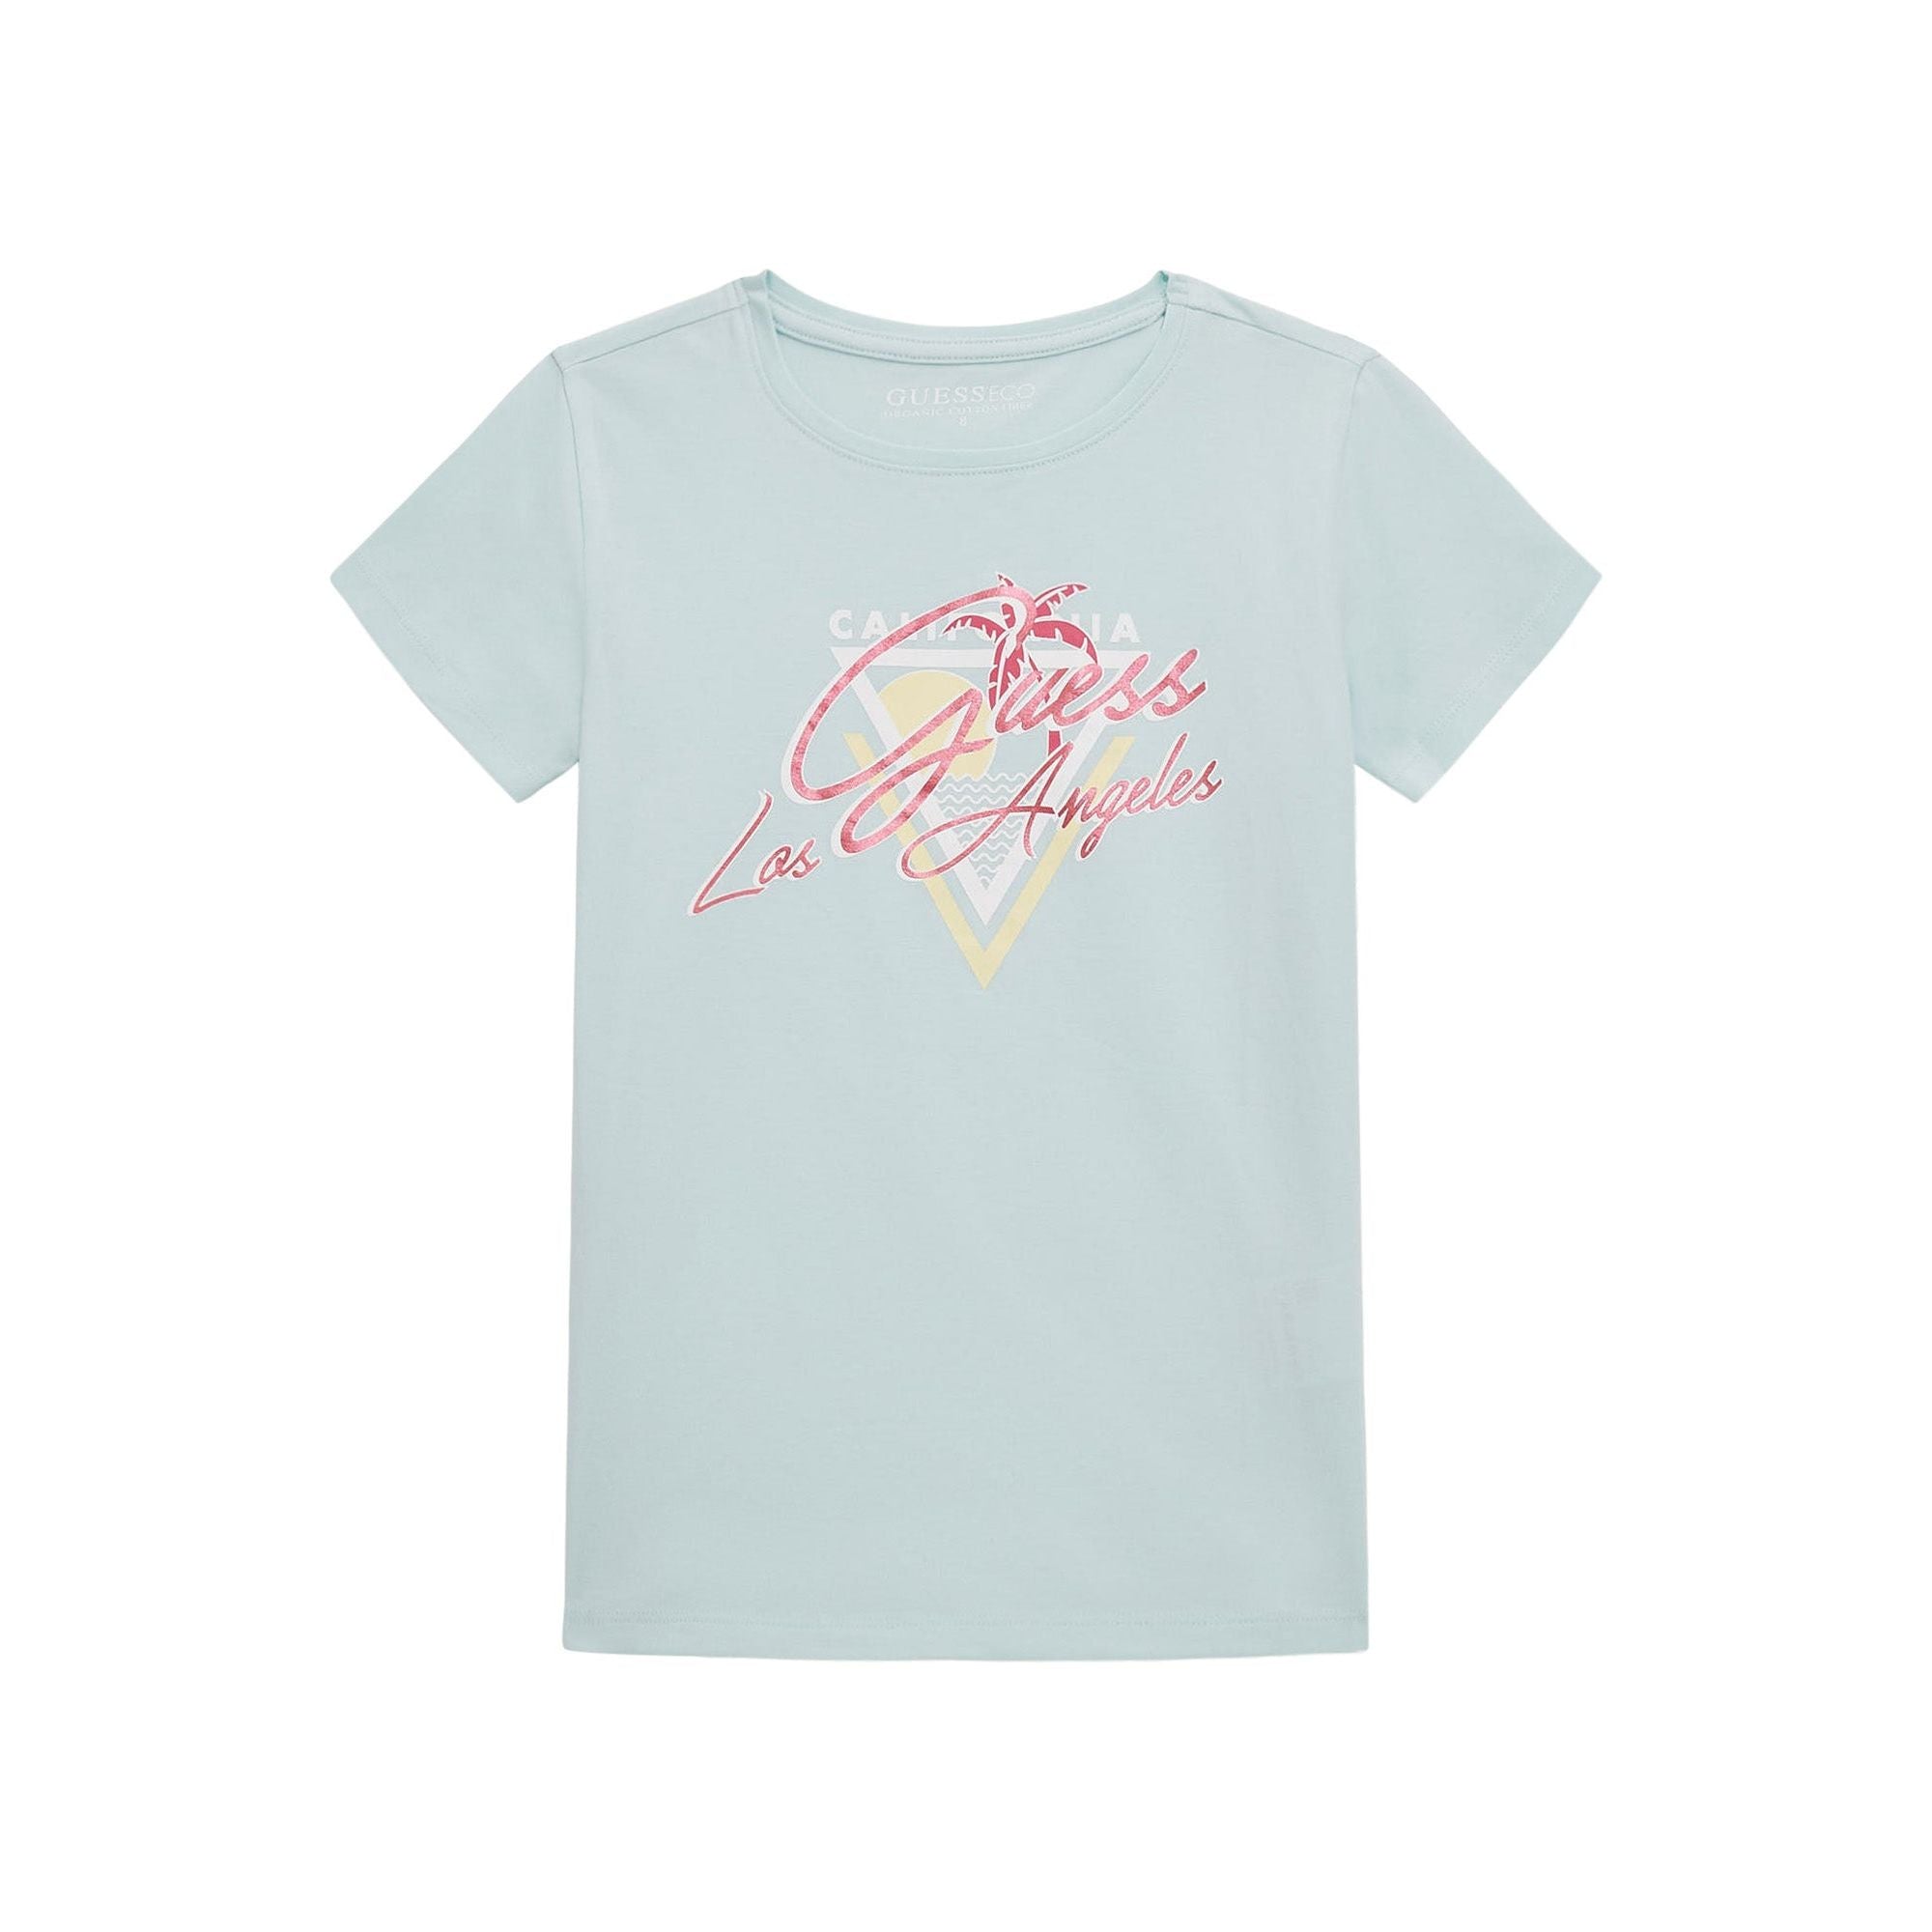 Guess - Girls T-Shirt in Caribbean Holiday